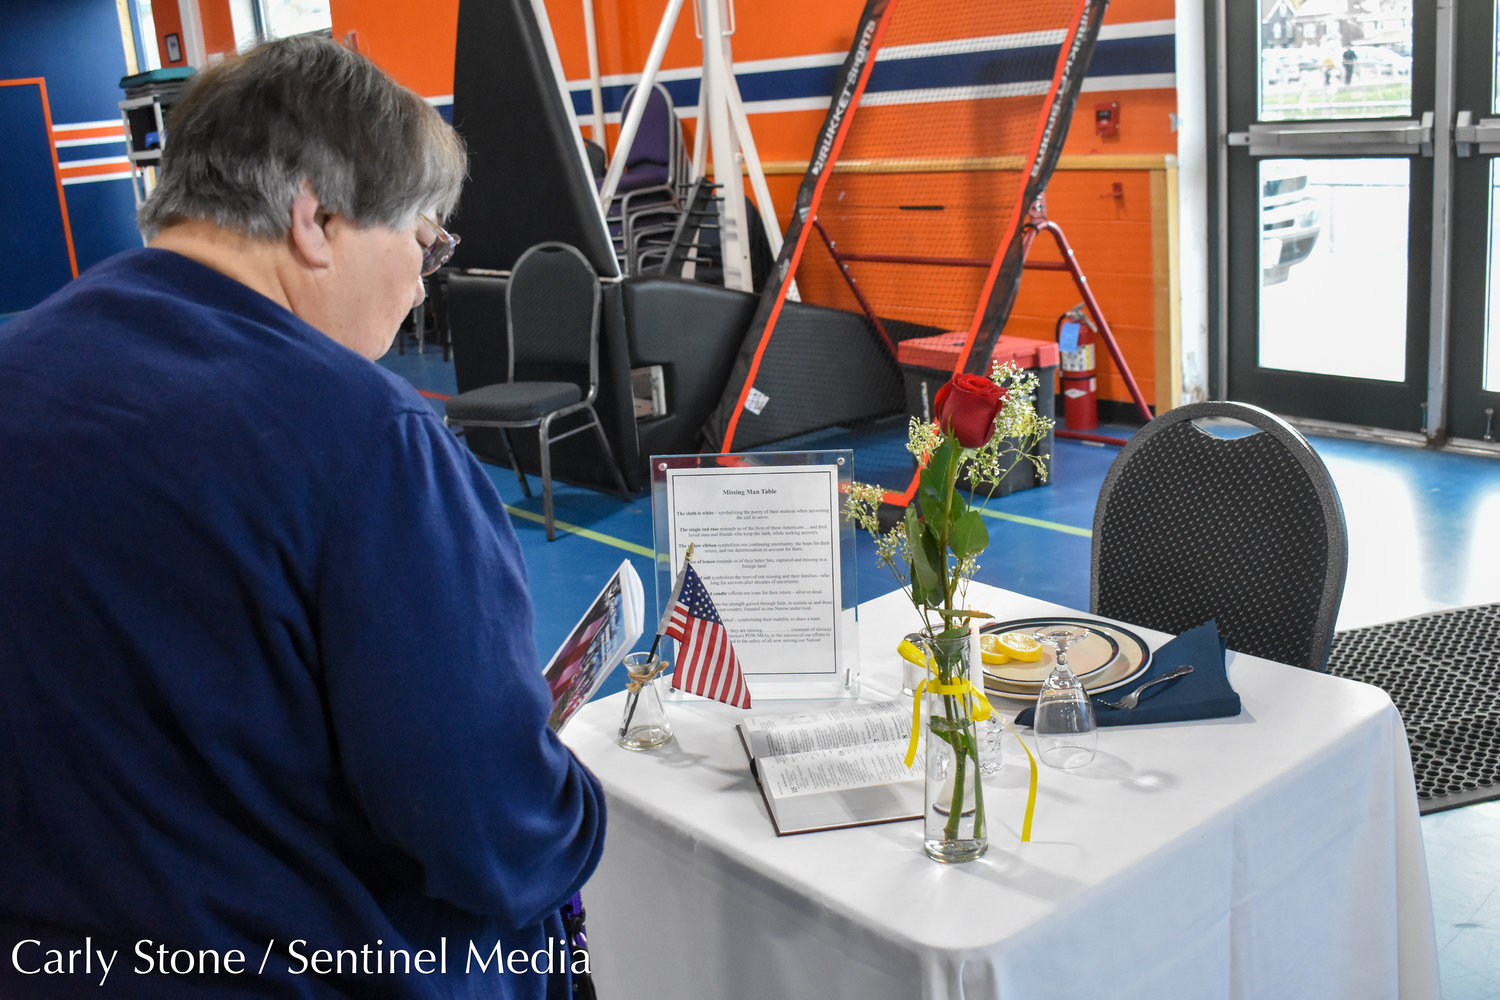 Inside the Parkway Center on Saturday, November 5 was a "
"missing man table," also known as a fallen comrade table. This symbolic gesture is in honor of fallen, missing, or imprisoned military service members. Each item on the table holds a special meaning.